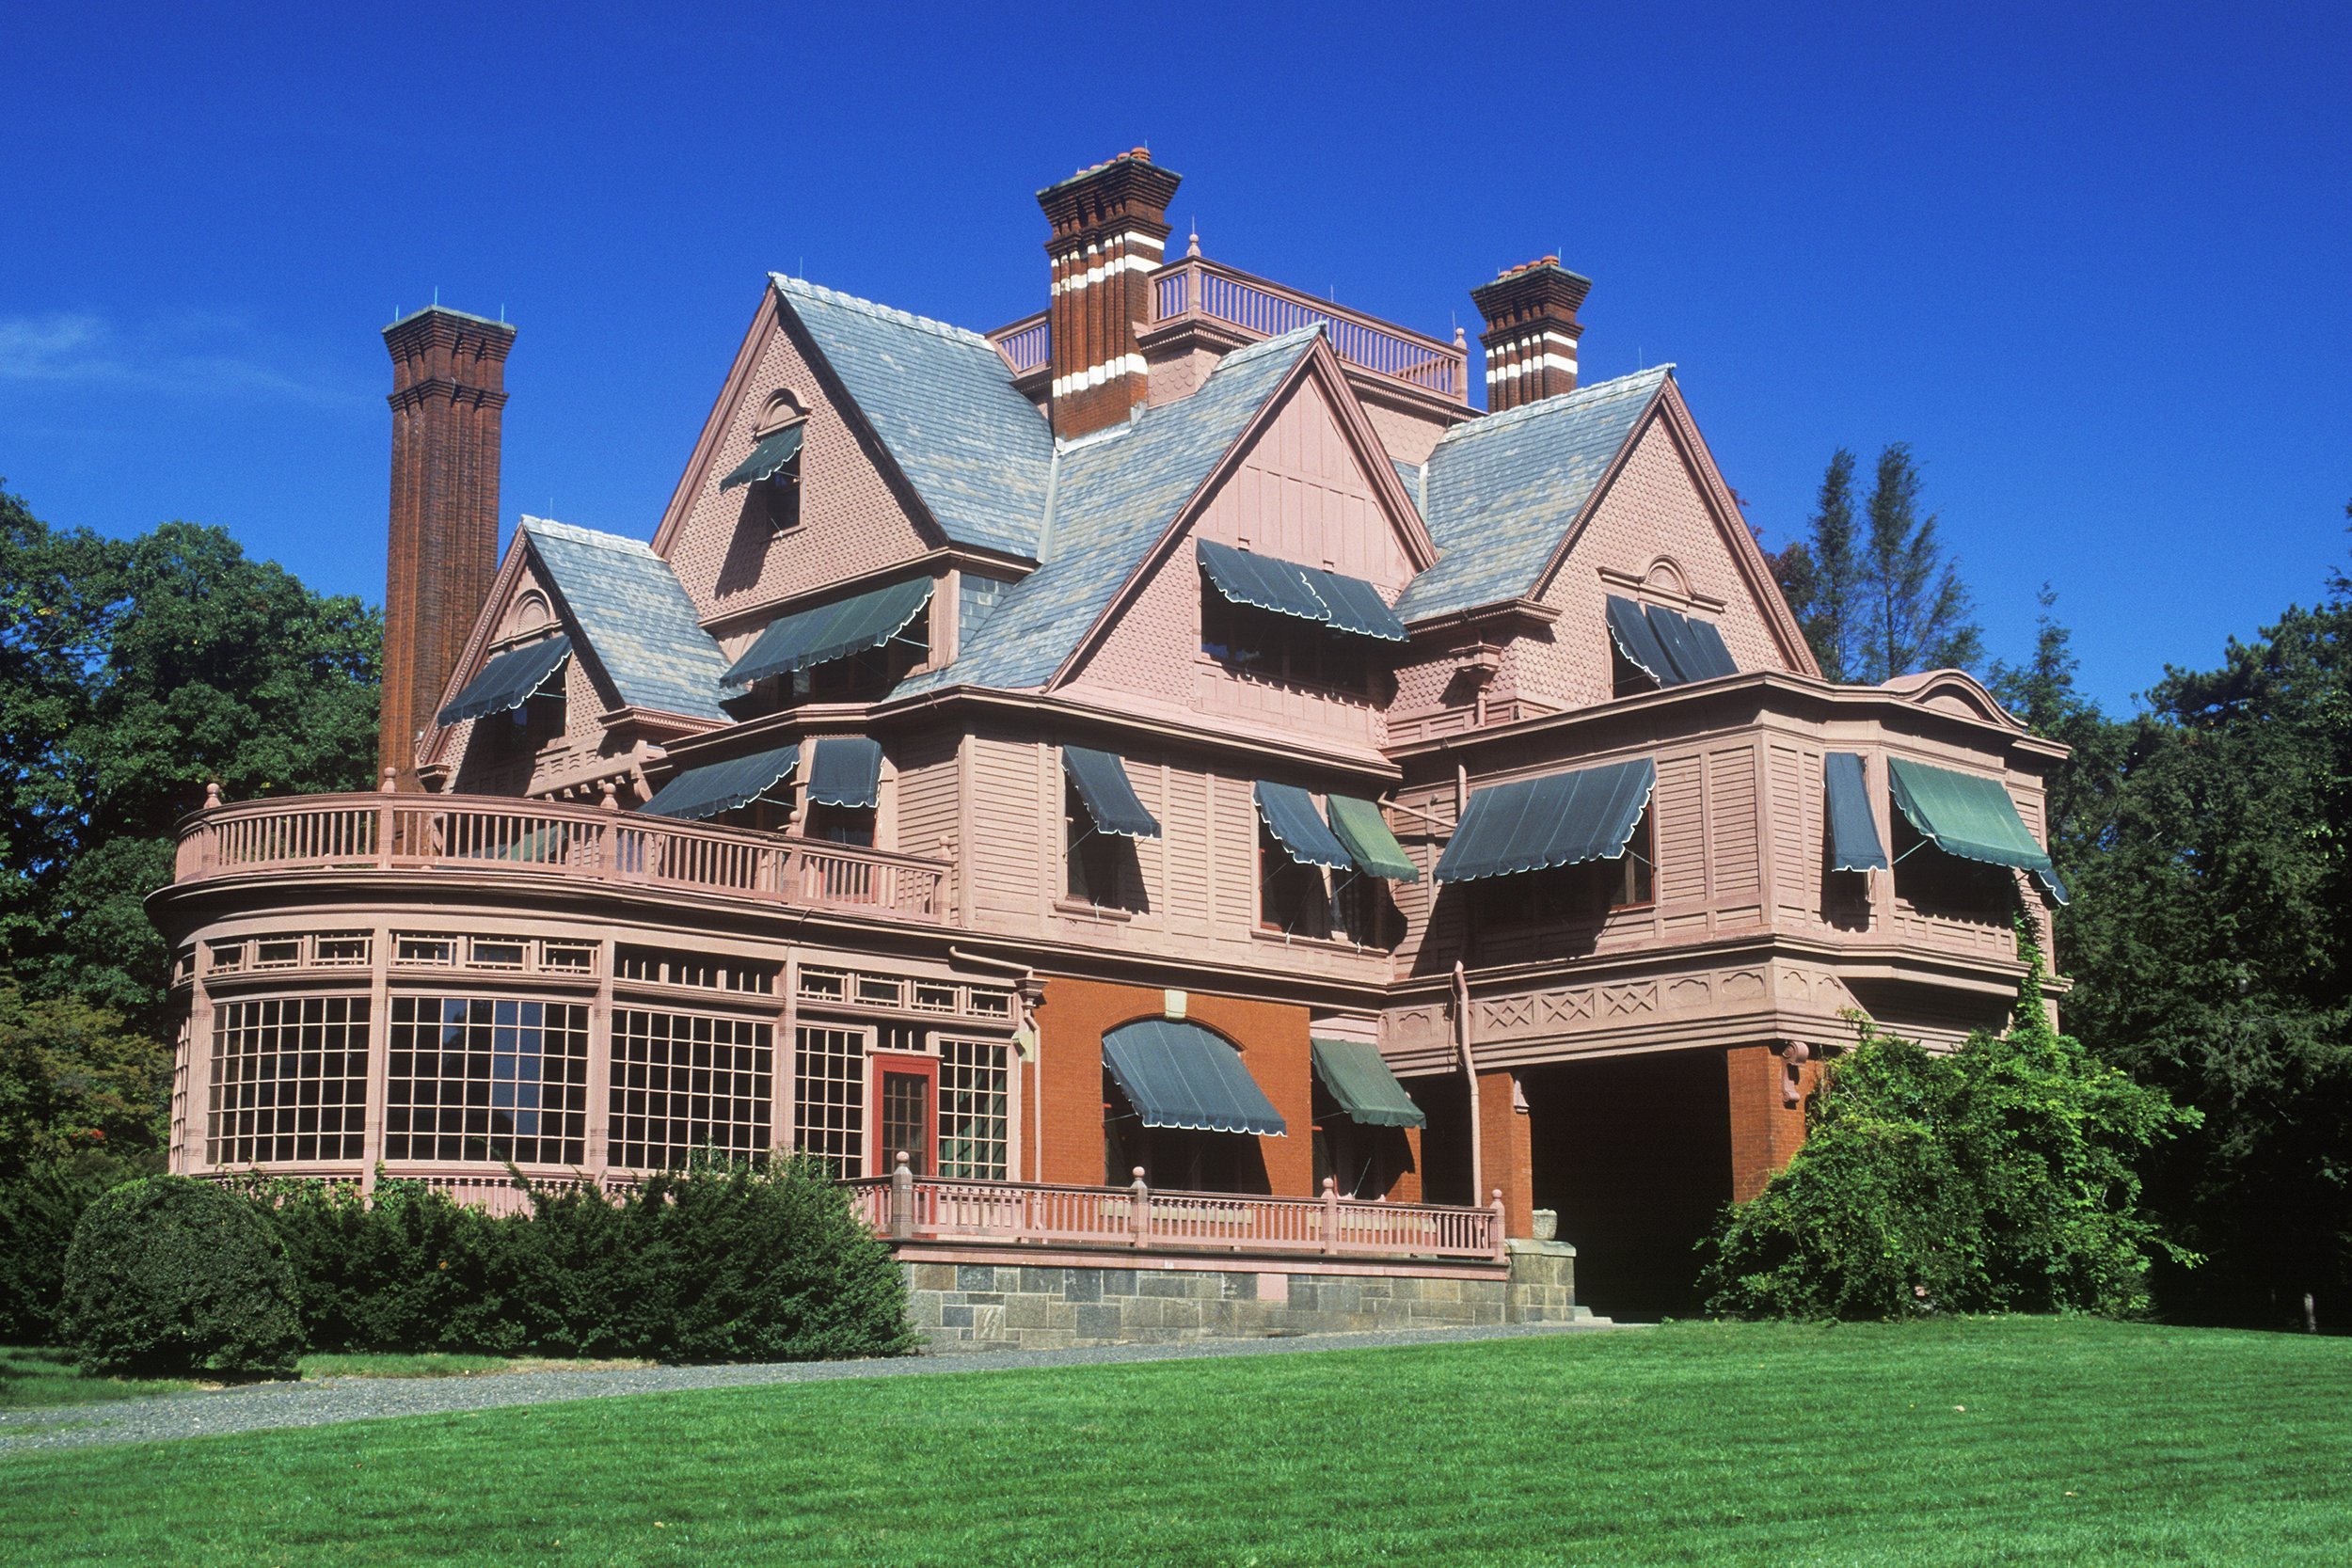 <p>This National Historical Park preserves <a href="https://www.nps.gov/edis/index.htm">Thomas Edison's home, laboratory, and estate</a> in West Orange. Entrance costs $15, and an audio tour is available for an additional $5. Tours of Edison's home, known as Glenmont, are normally offered on varying seasonal schedules and require tickets, which are limited and first come, first served. </p><p><b>Related:</b> <a href="https://blog.cheapism.com/suburban-cities/">The Most Affordable Suburbs That Still Offer City Amenities</a> </p>